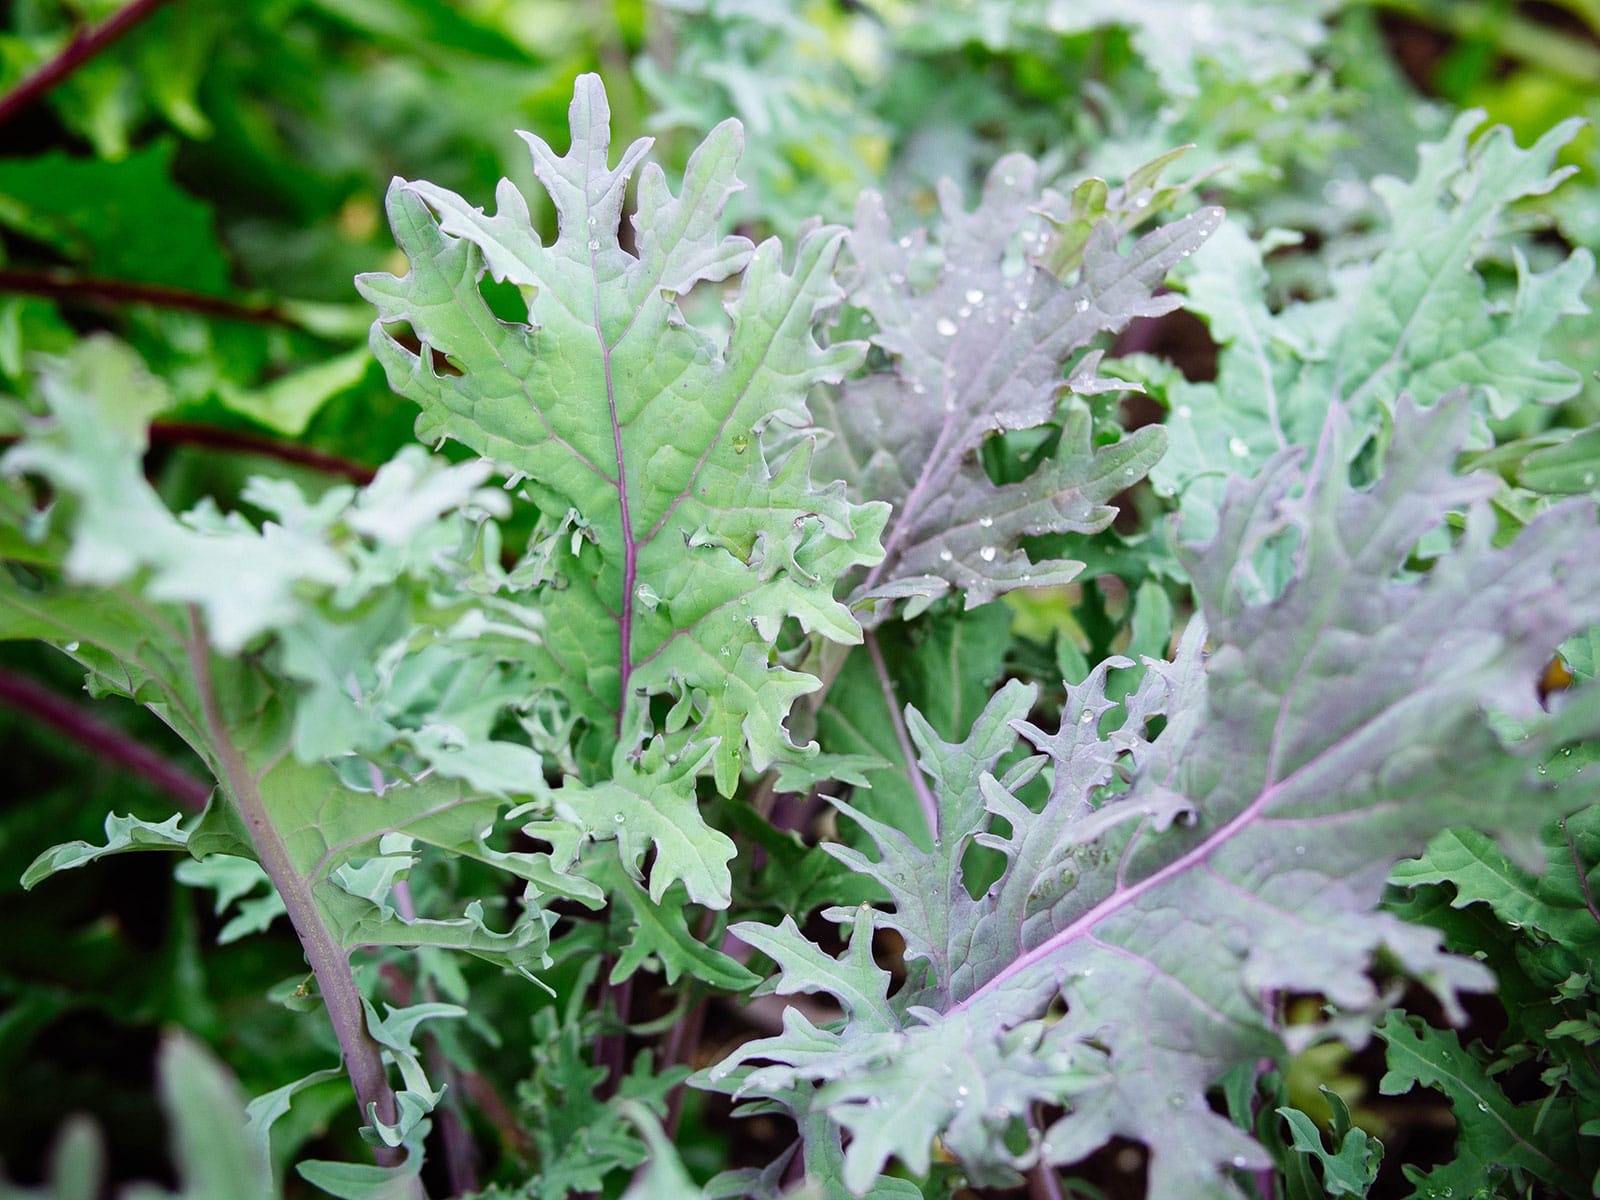 Close-up of frilly green and purple kale leaves